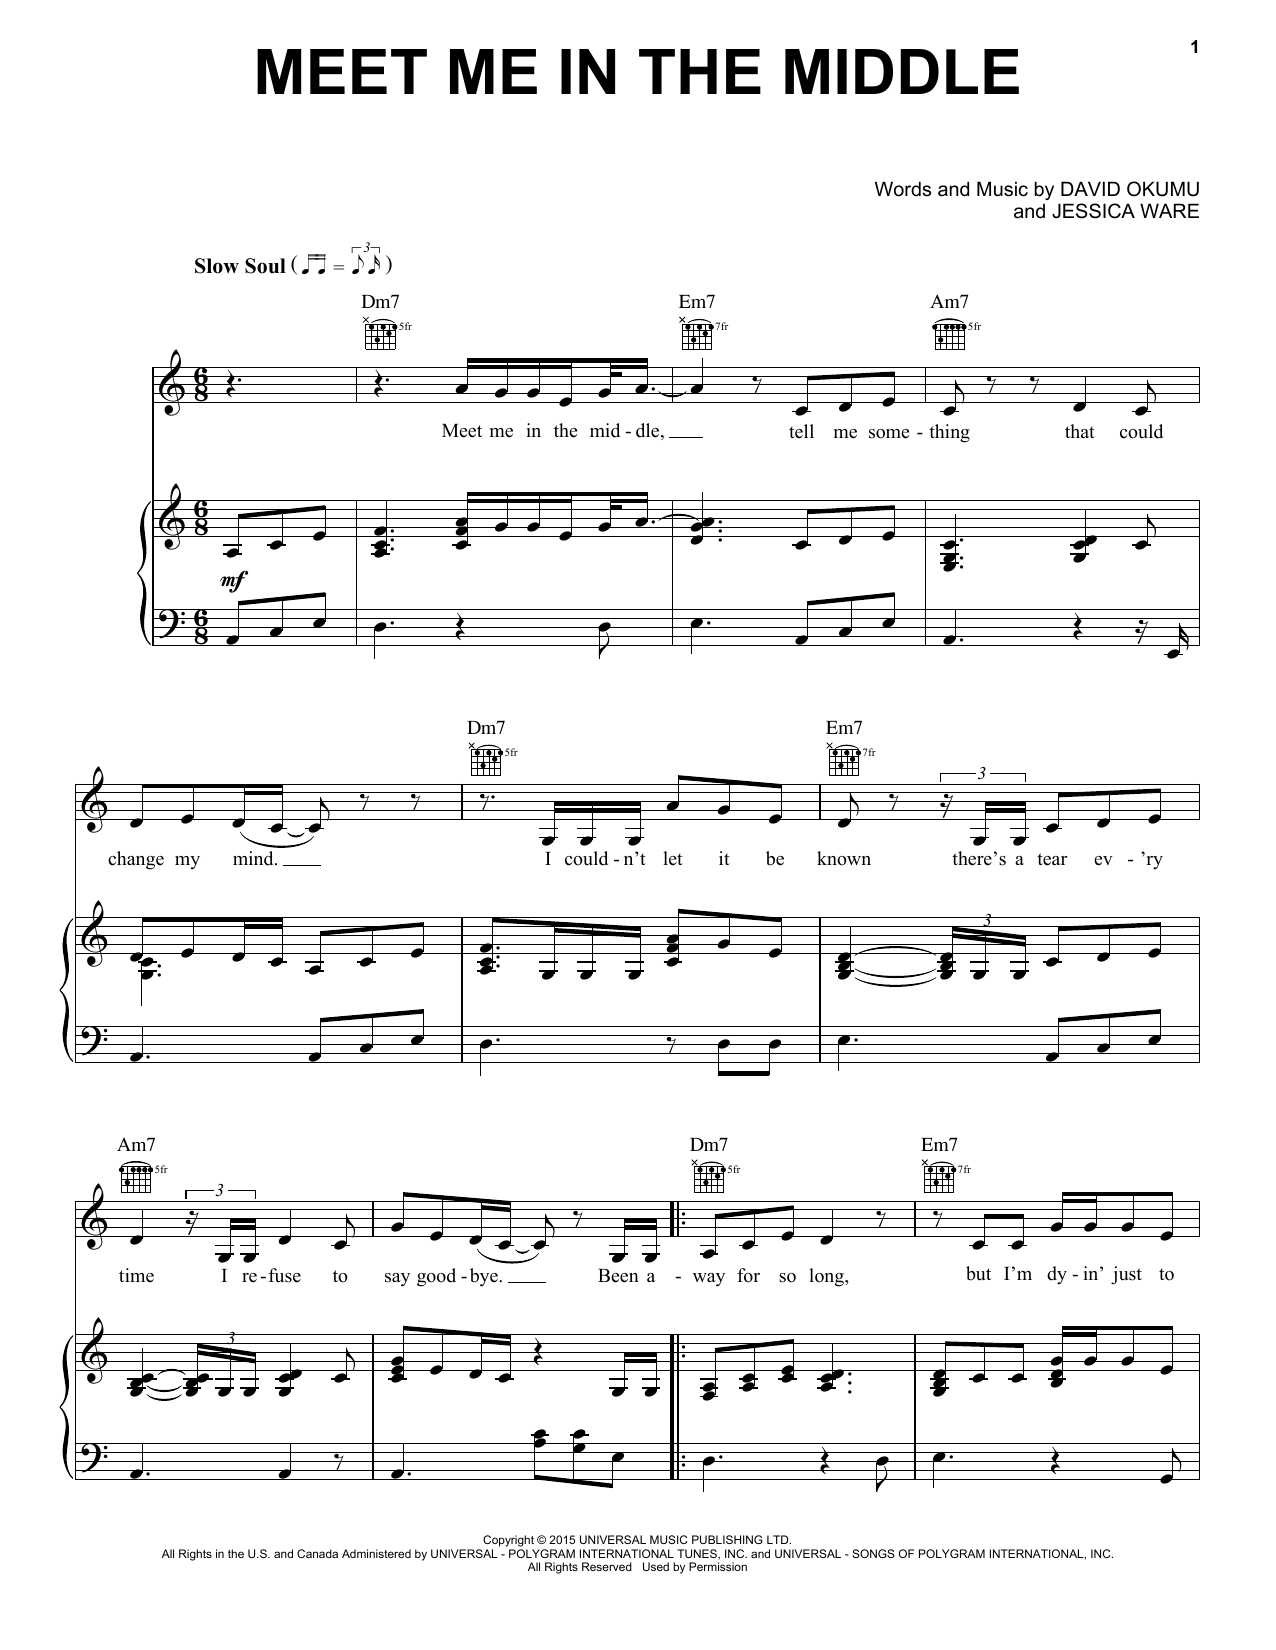 Download Jessie Ware Meet Me In The Middle Sheet Music